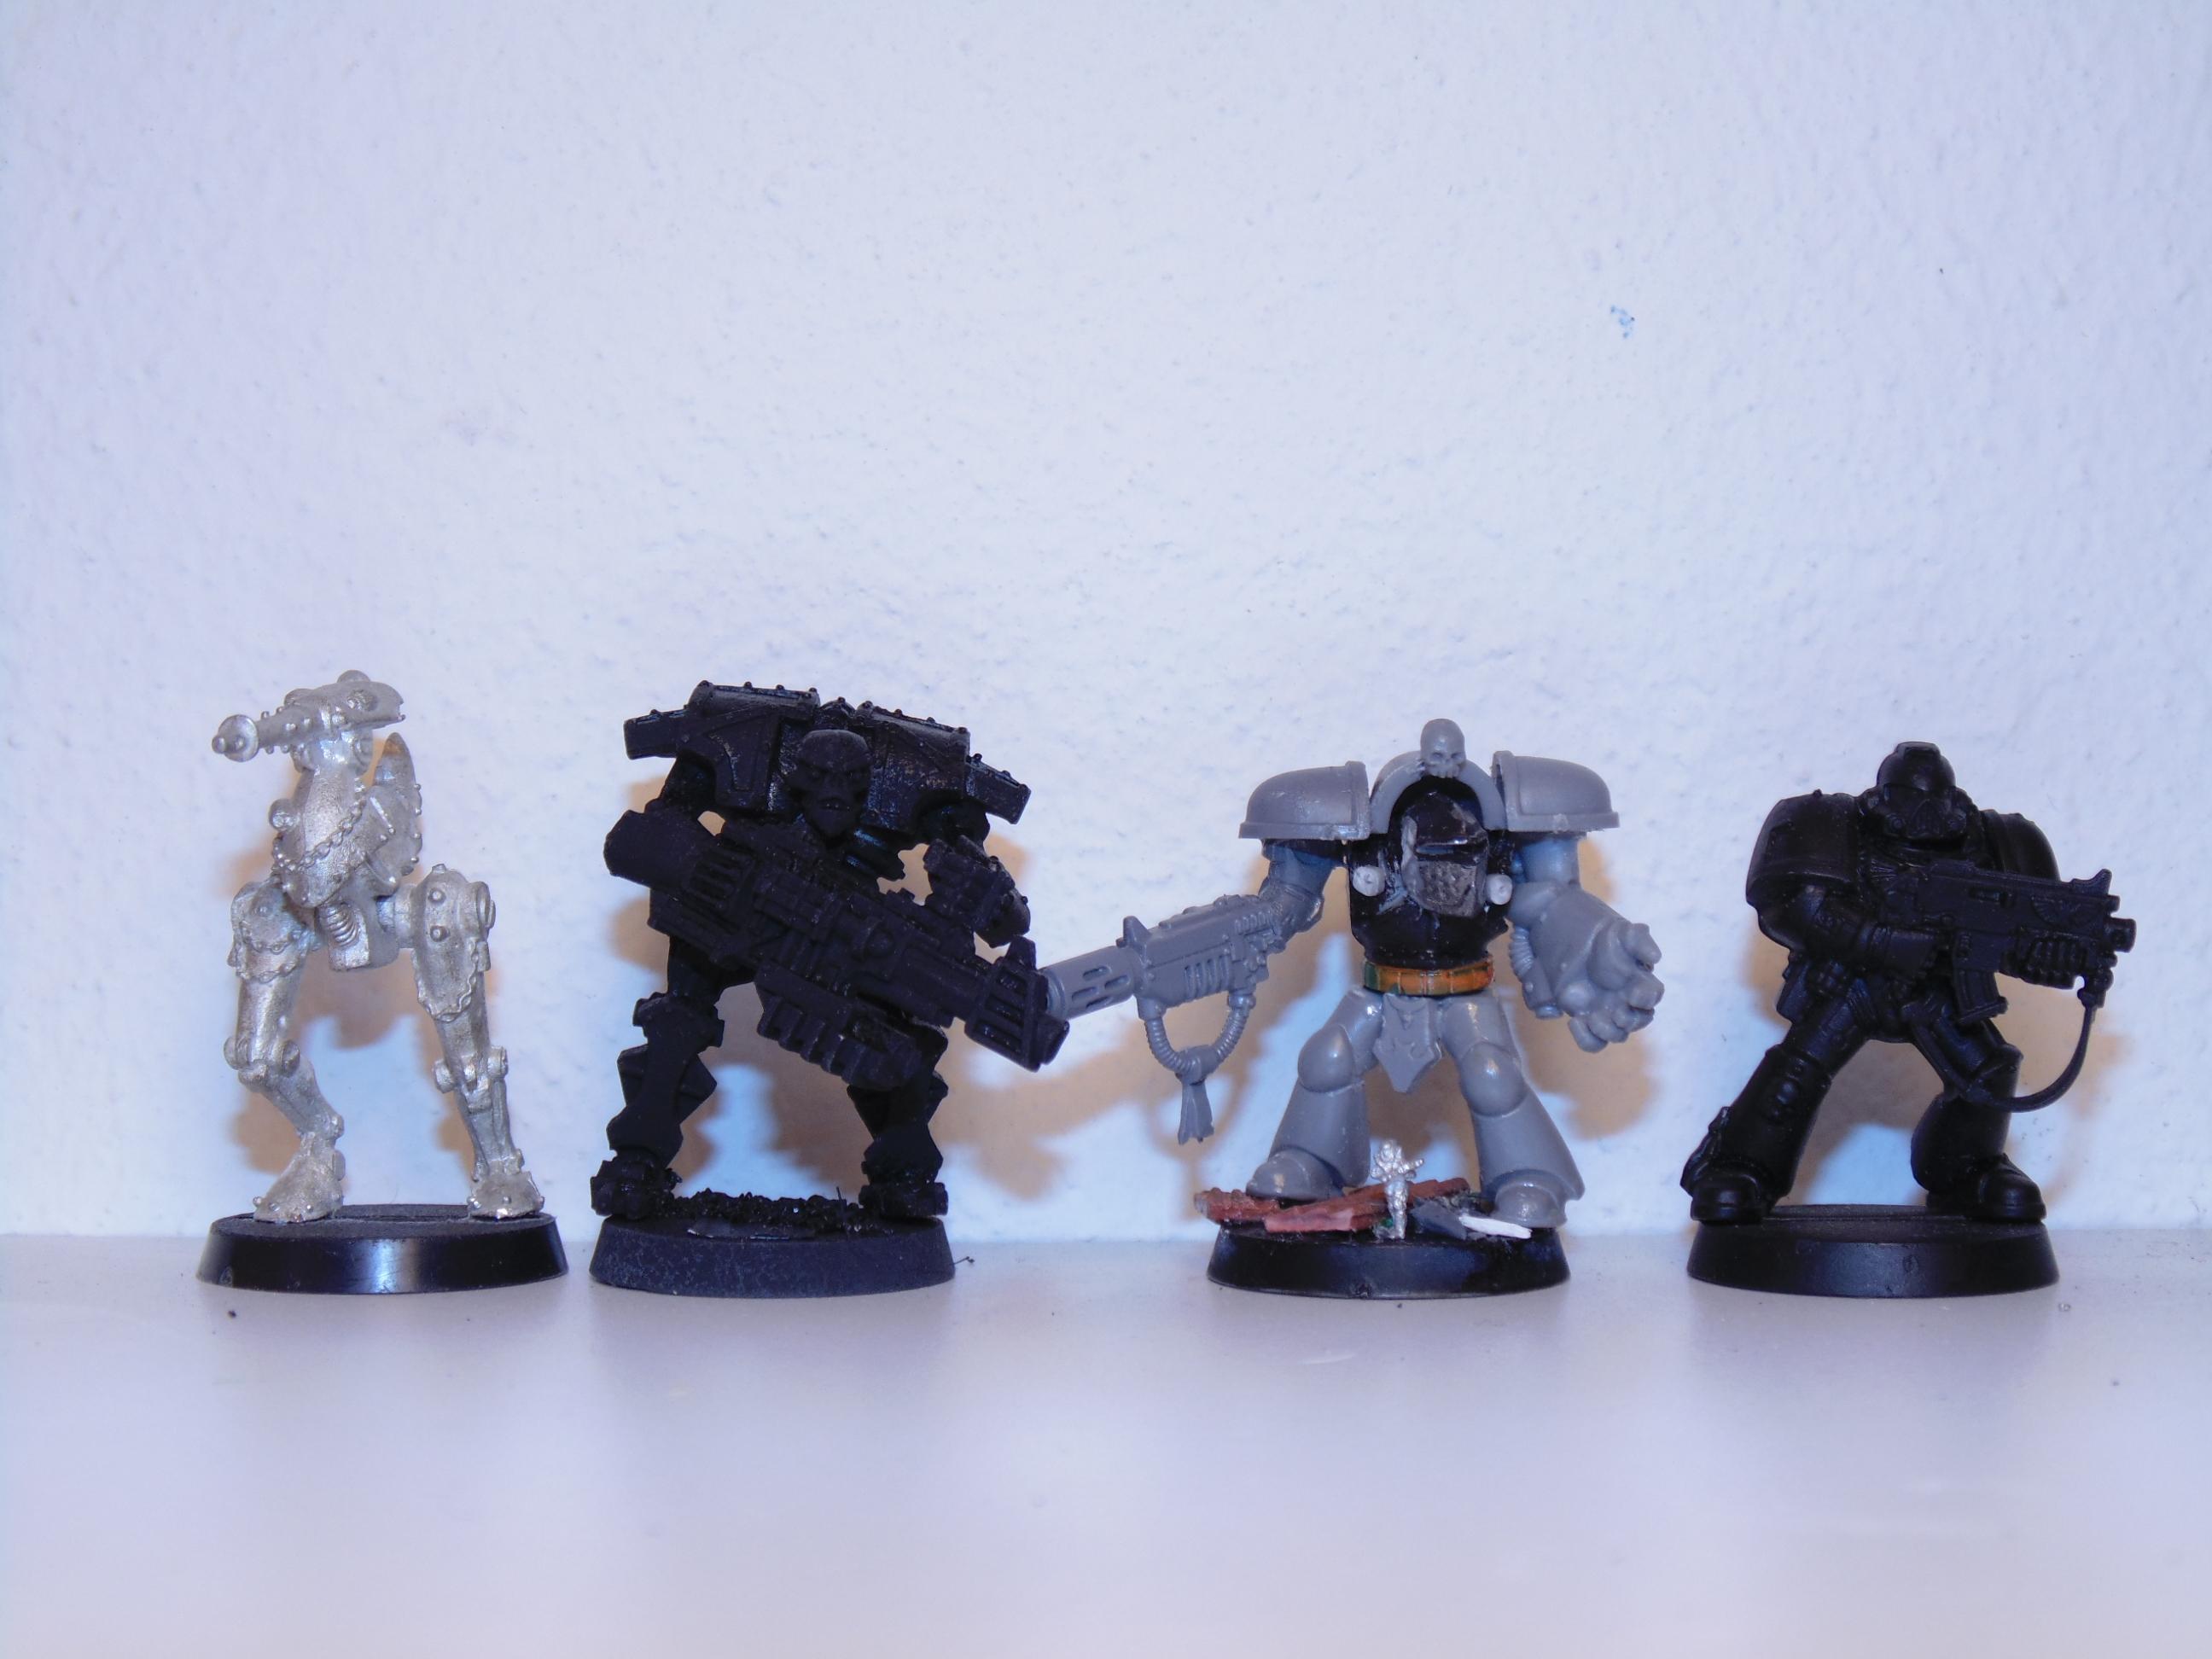 6mm, Comparison, Conversion, Epic, Imperial, Knights, Land Raider, Scratch Build, Size, Space, Space Marines, Thunderhawk, Titan, Warlord